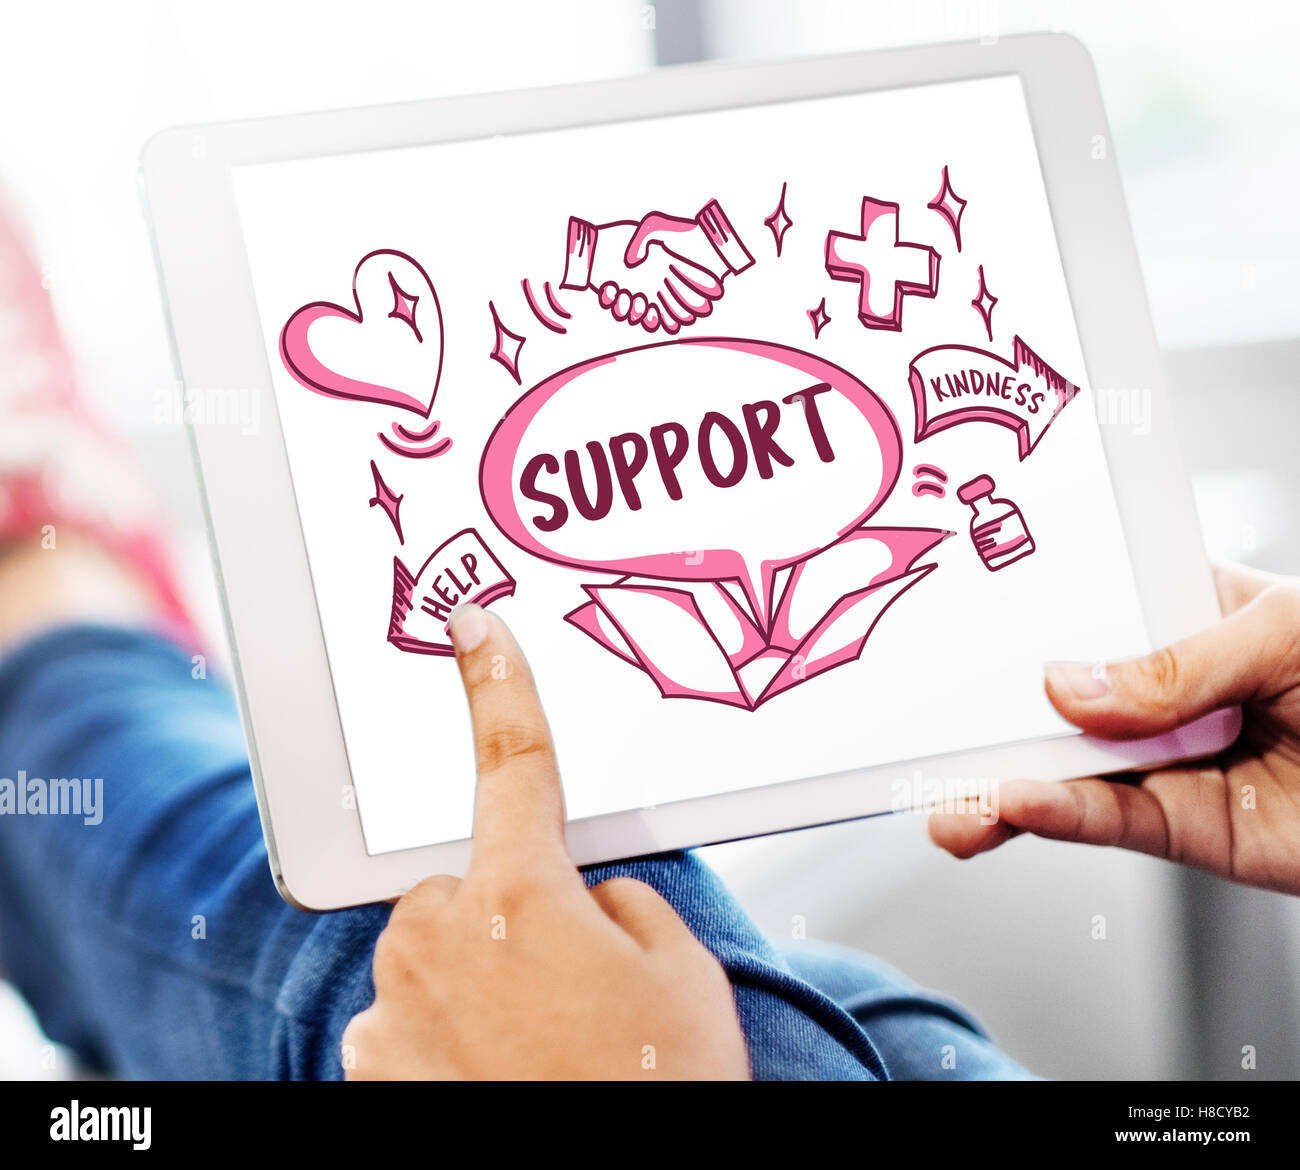 Support Donations Charity Volunteer Care Welfare Concept Stock Photo